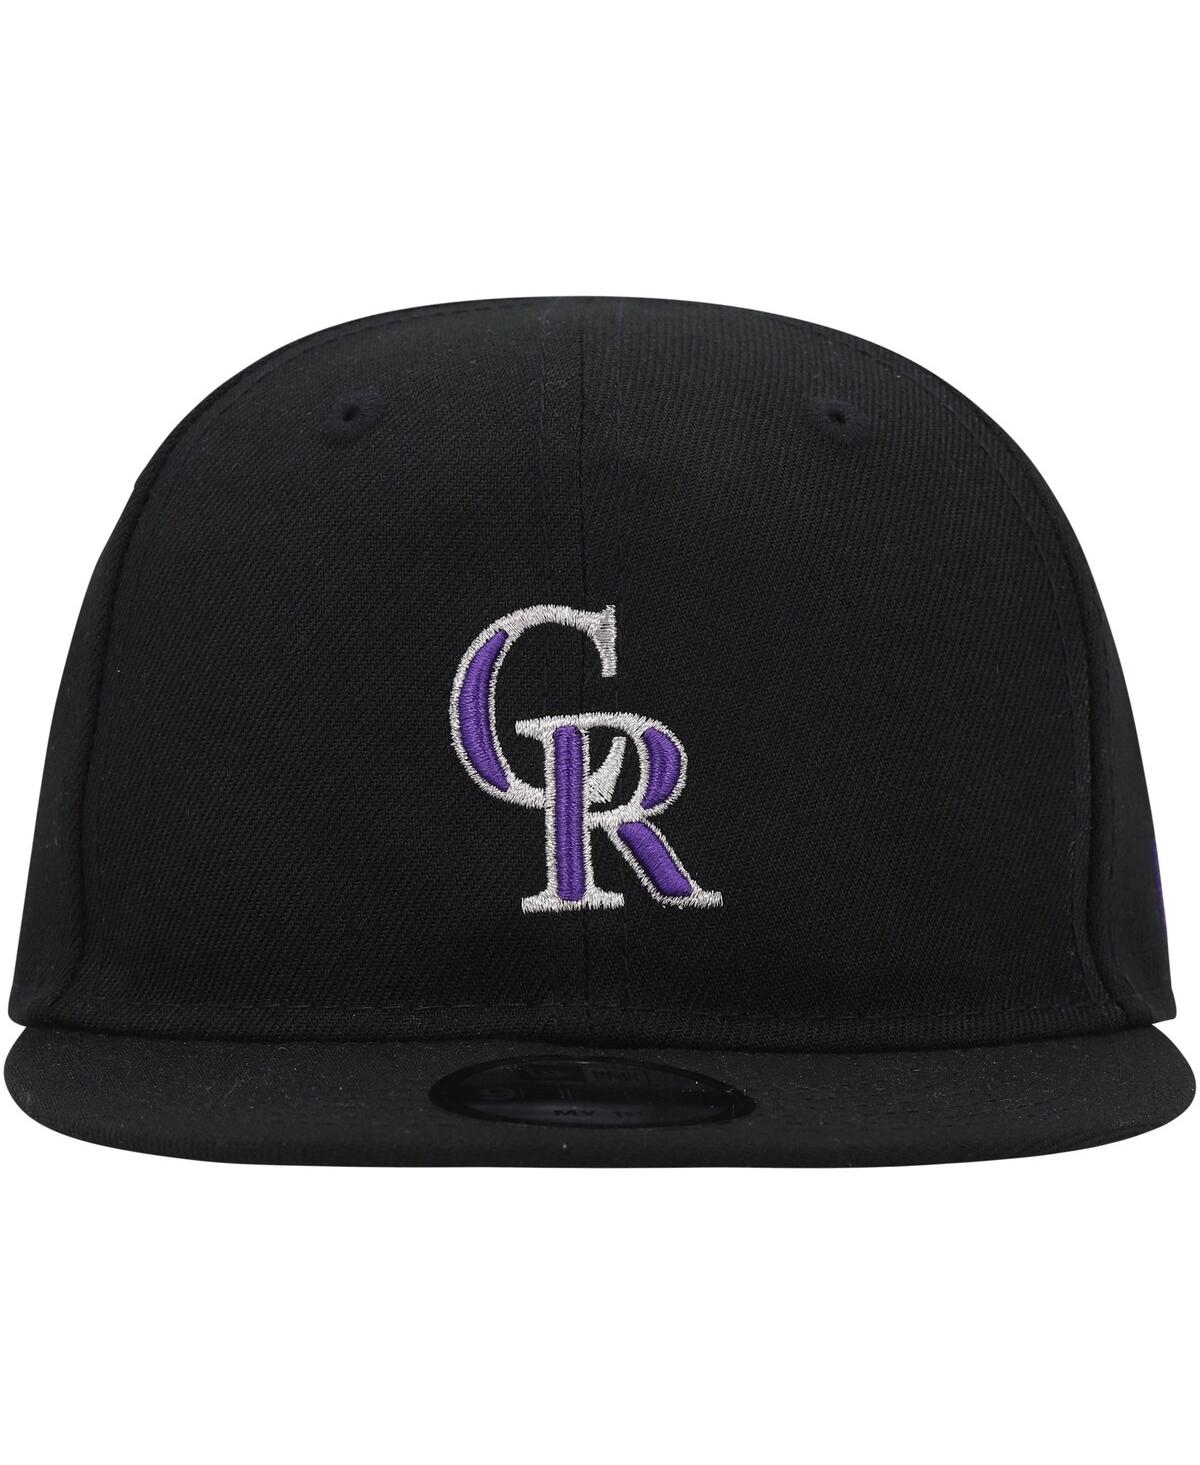 Shop New Era Infant Boys And Girls  Black Colorado Rockies My First 9fifty Adjustable Hat